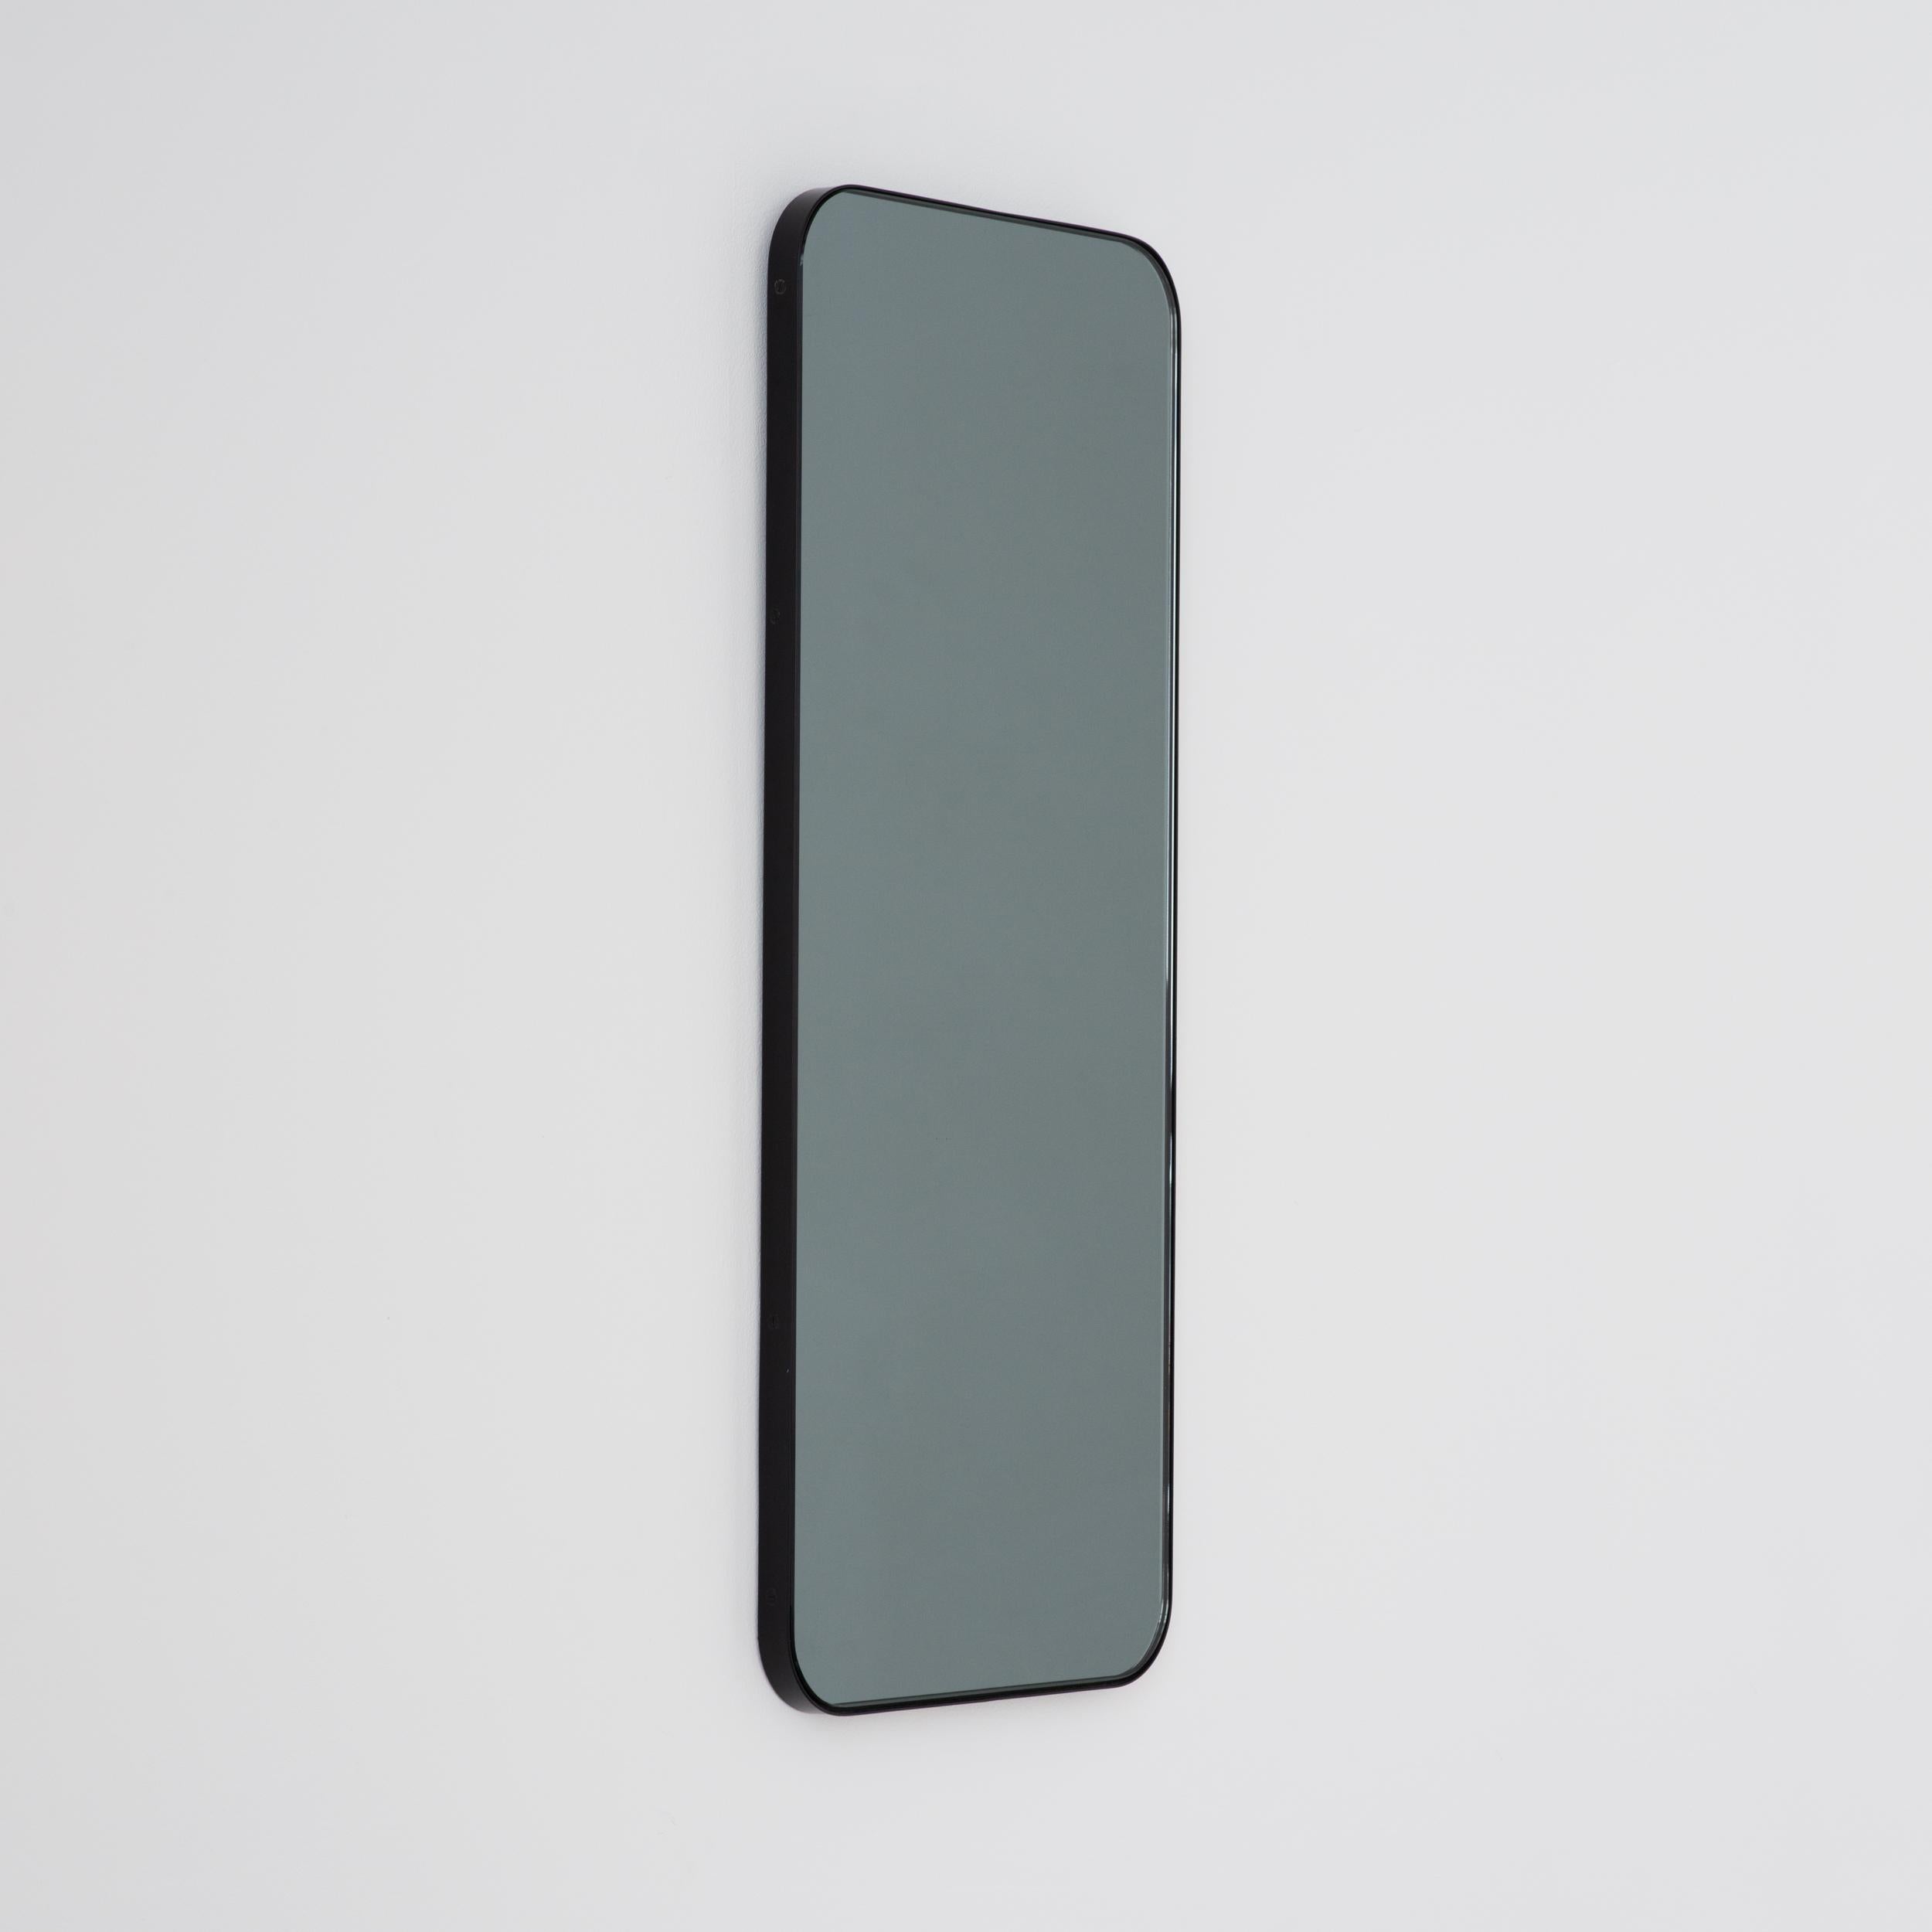 Powder-Coated In Stock Quadris Black Tinted Rectangular Mirror with a Black Frame, Small For Sale